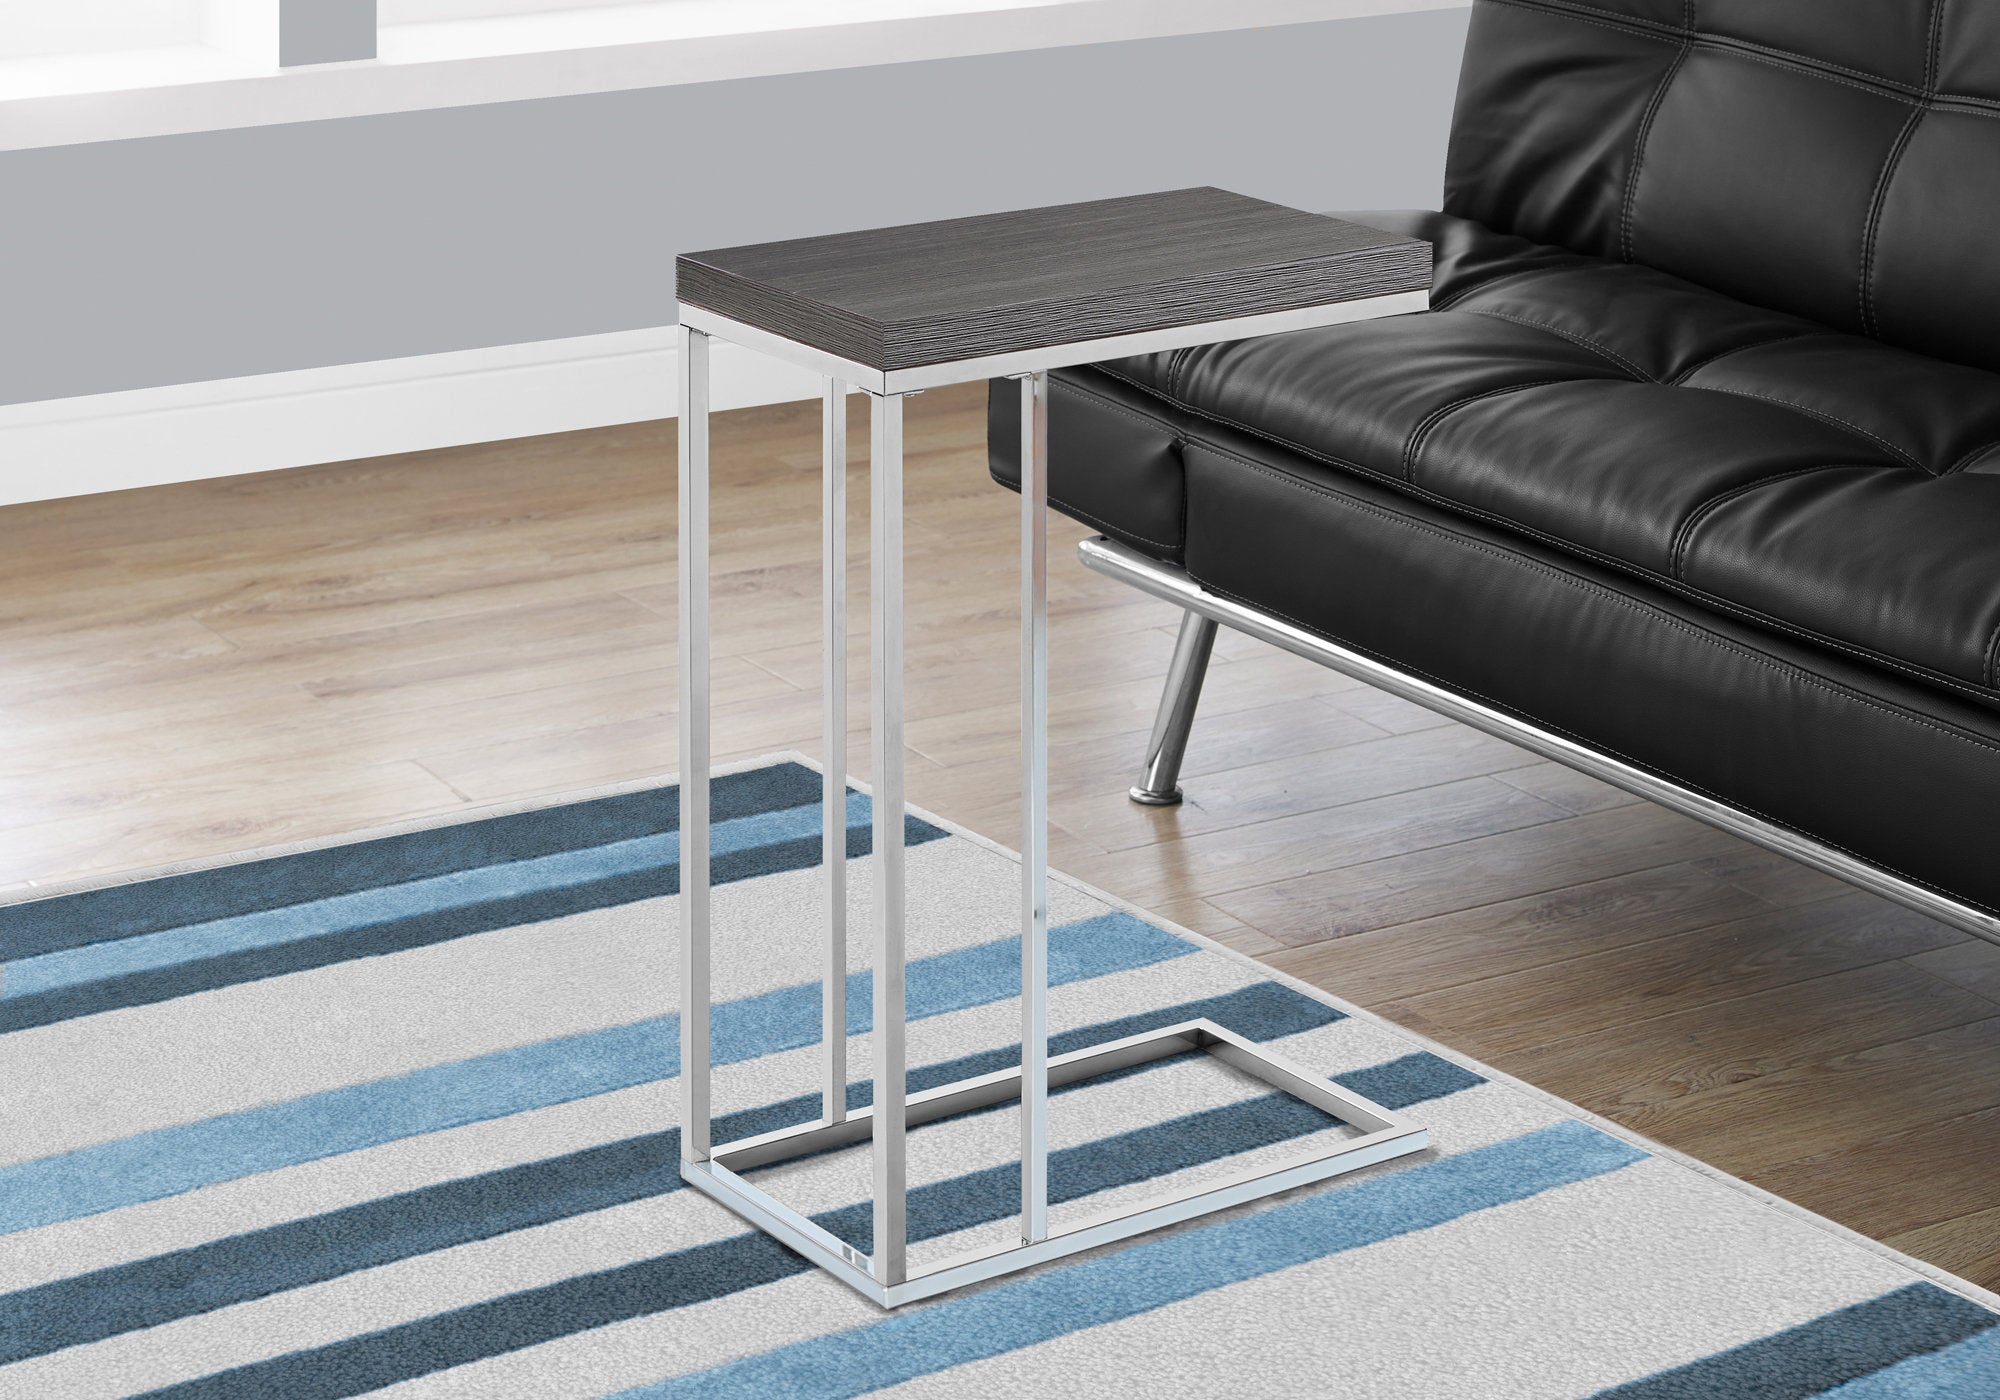 MN-763228    Accent Table, C-Shaped, End, Side, Snack, Living Room, Bedroom, Metal Legs, Laminate, Grey, Chrome, Contemporary, Modern